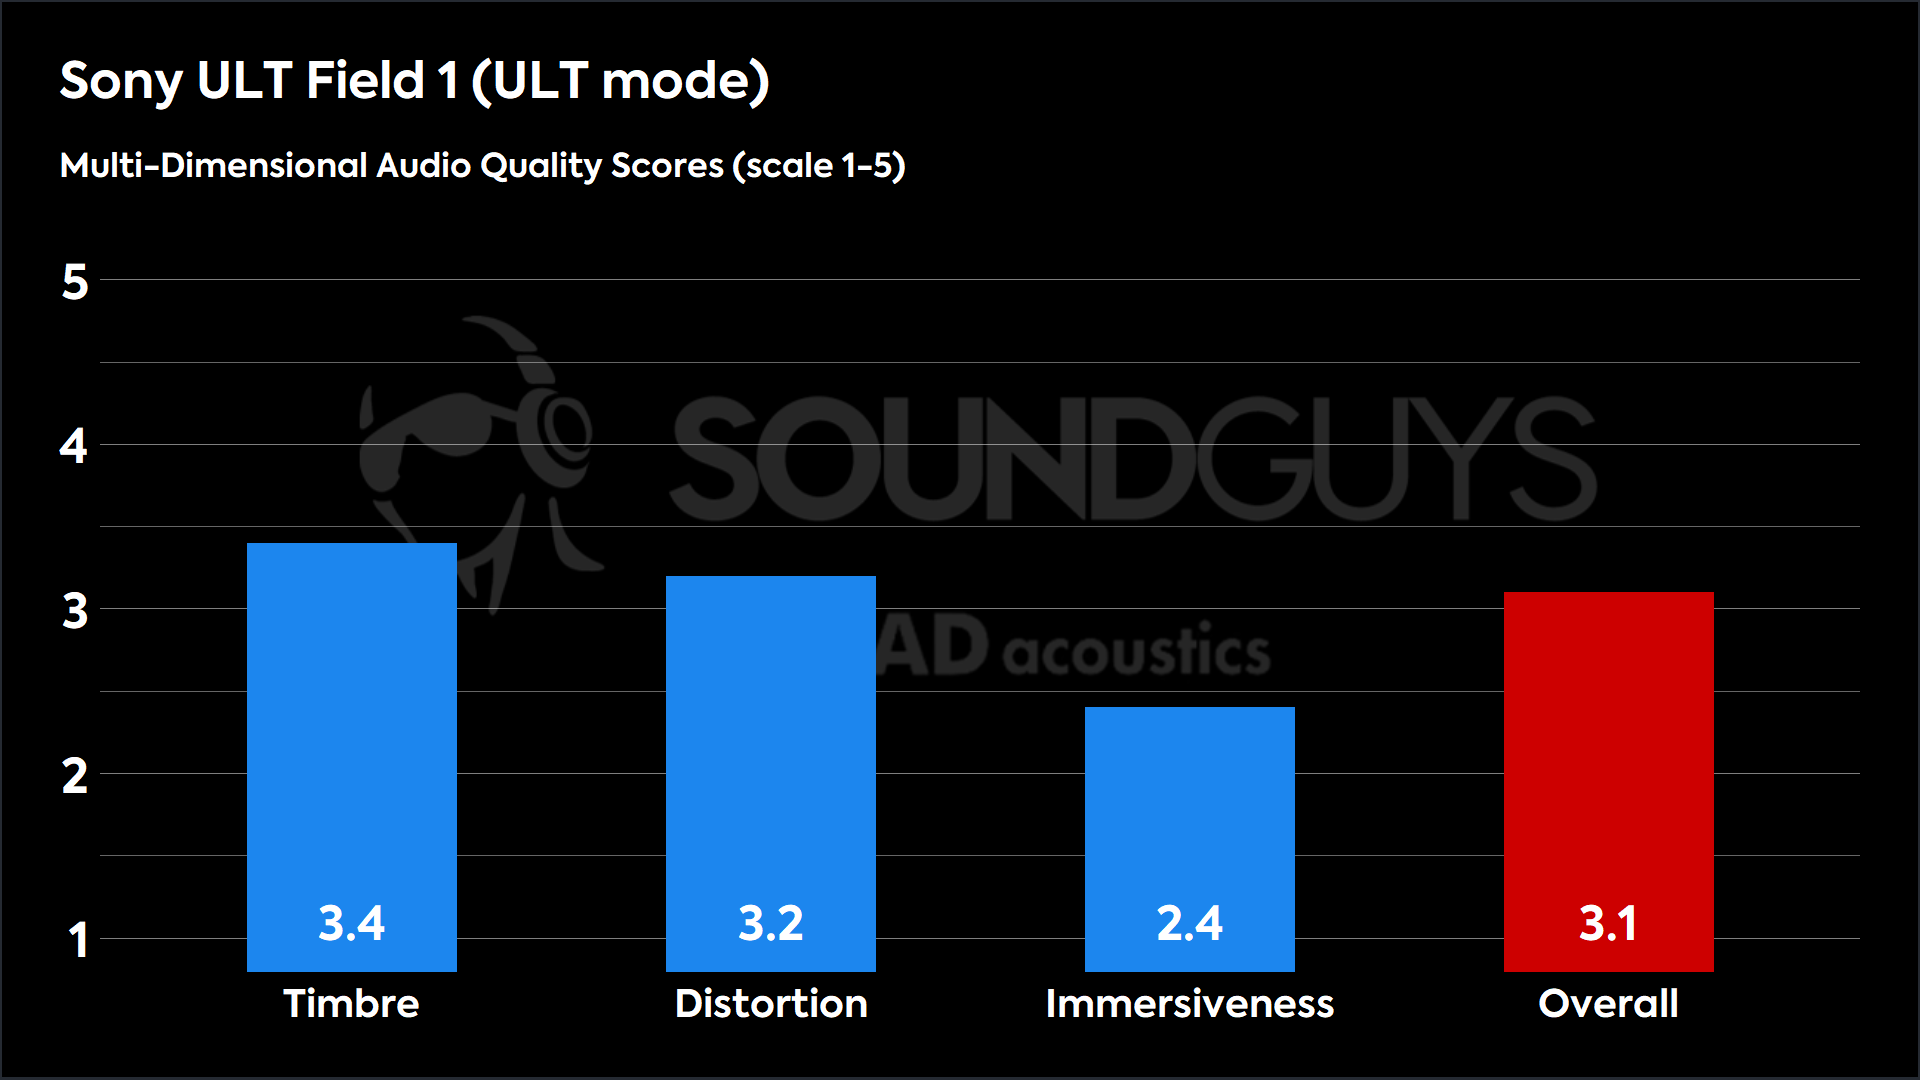 This chart shows the MDAQS results for the Sony ULT Field 1 in ULT mode mode. The Timbre score is 3.4, The Distortion score is 3.2, the Immersiveness score is 2.4, and the Overall Score is 3.1).